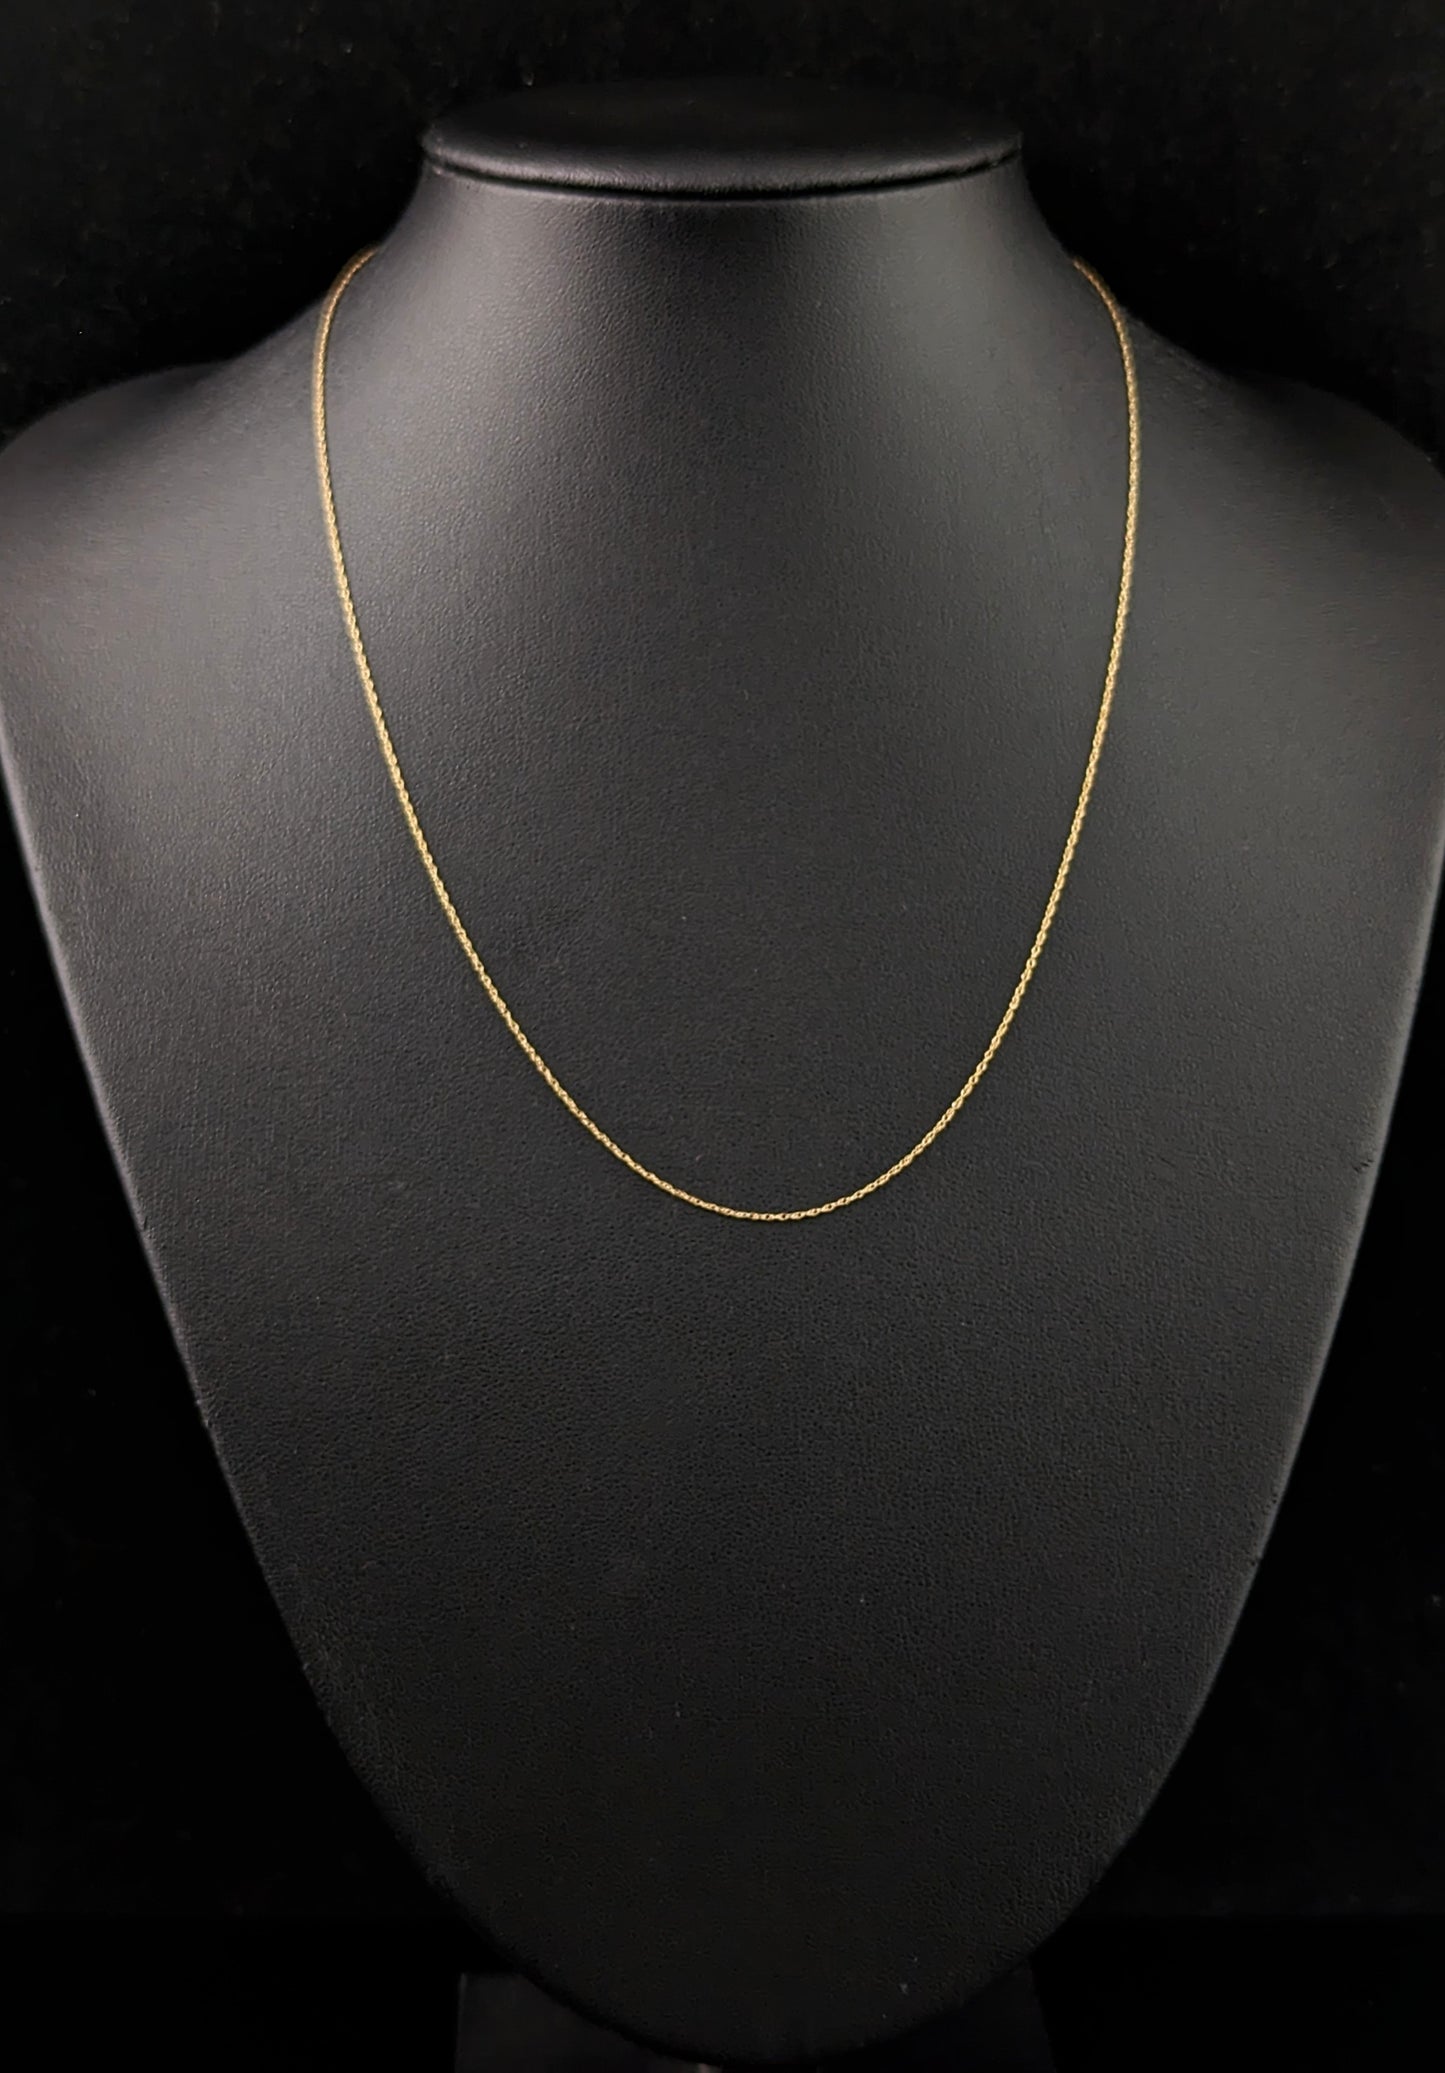 Vintage 9ct gold trace link chain necklace, dainty